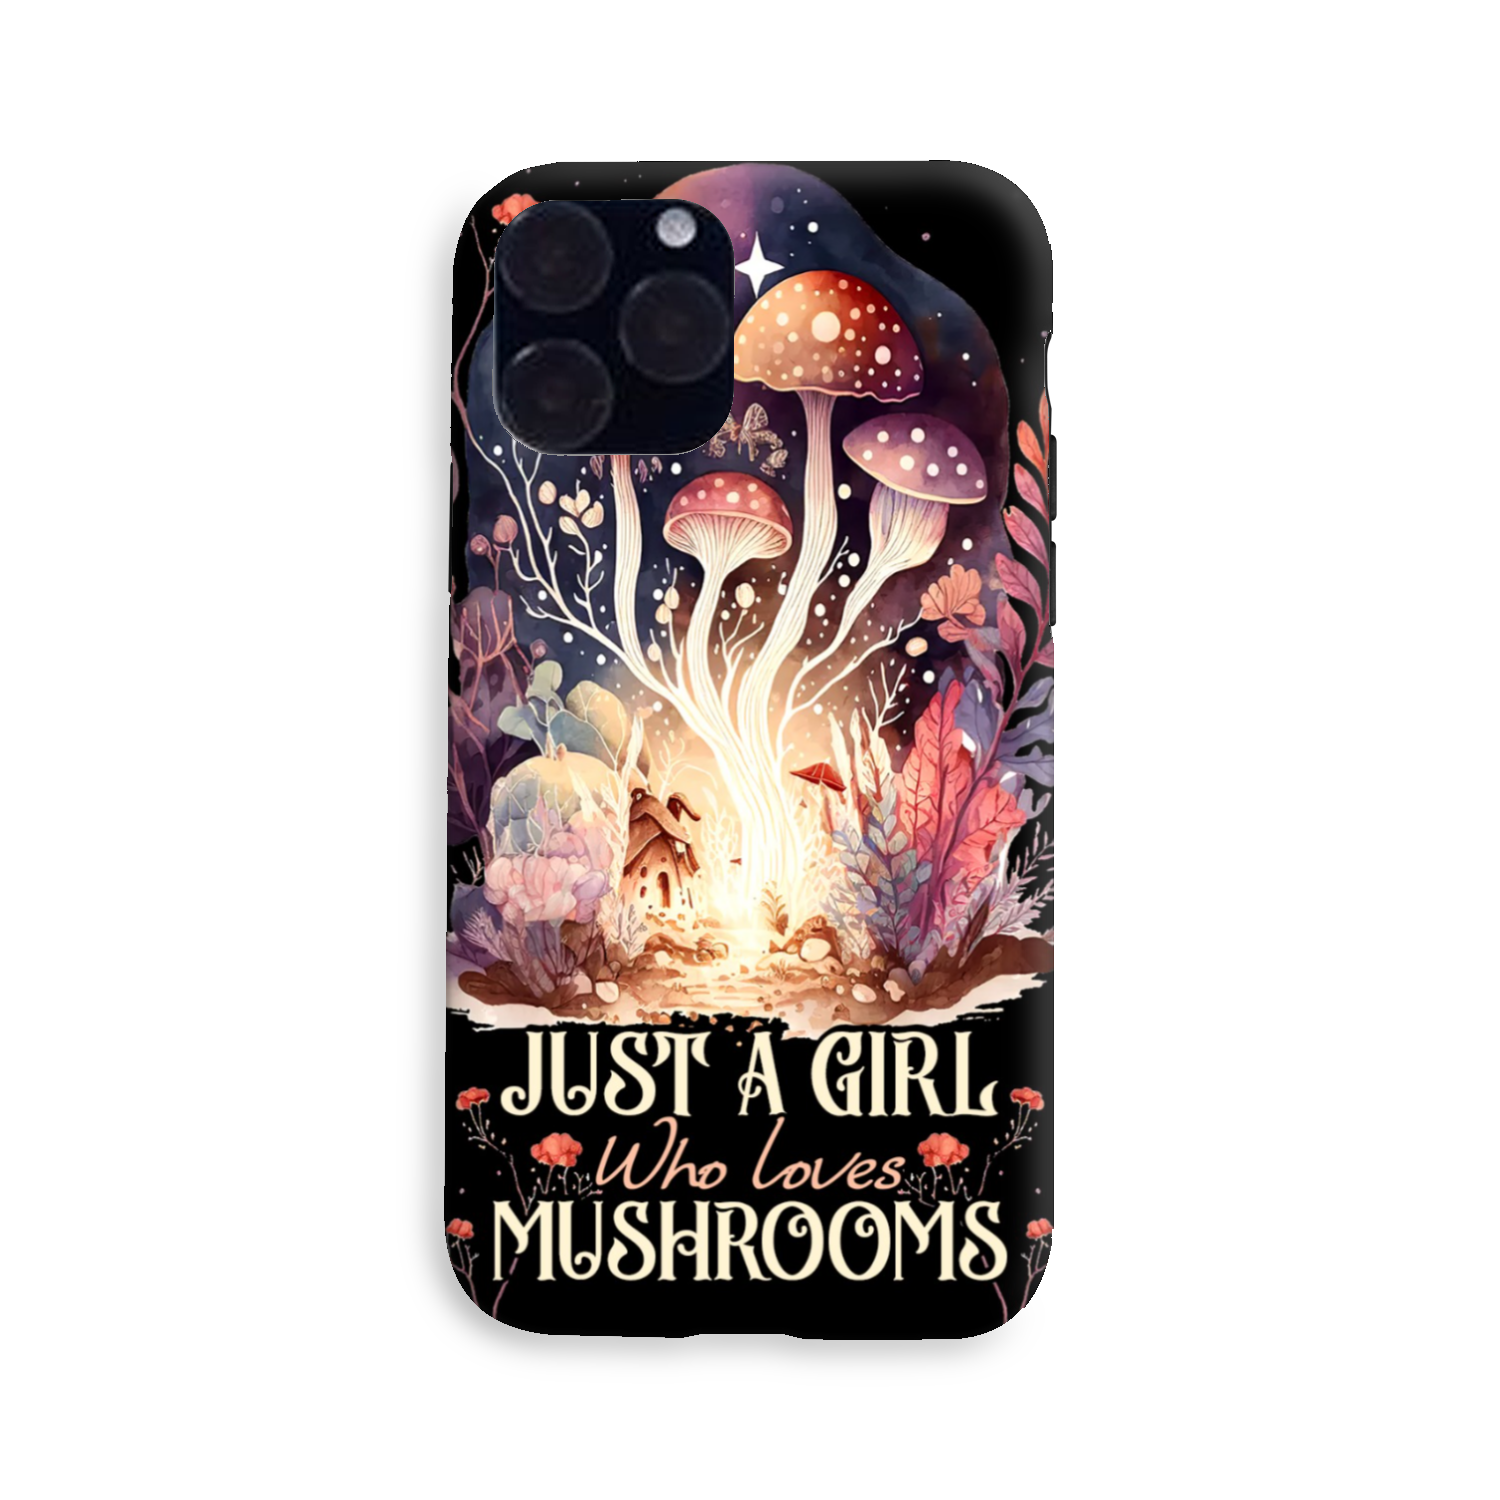 JUST A GIRL WHO LOVES MUSHROOMS PHONE CASE - TY1602231